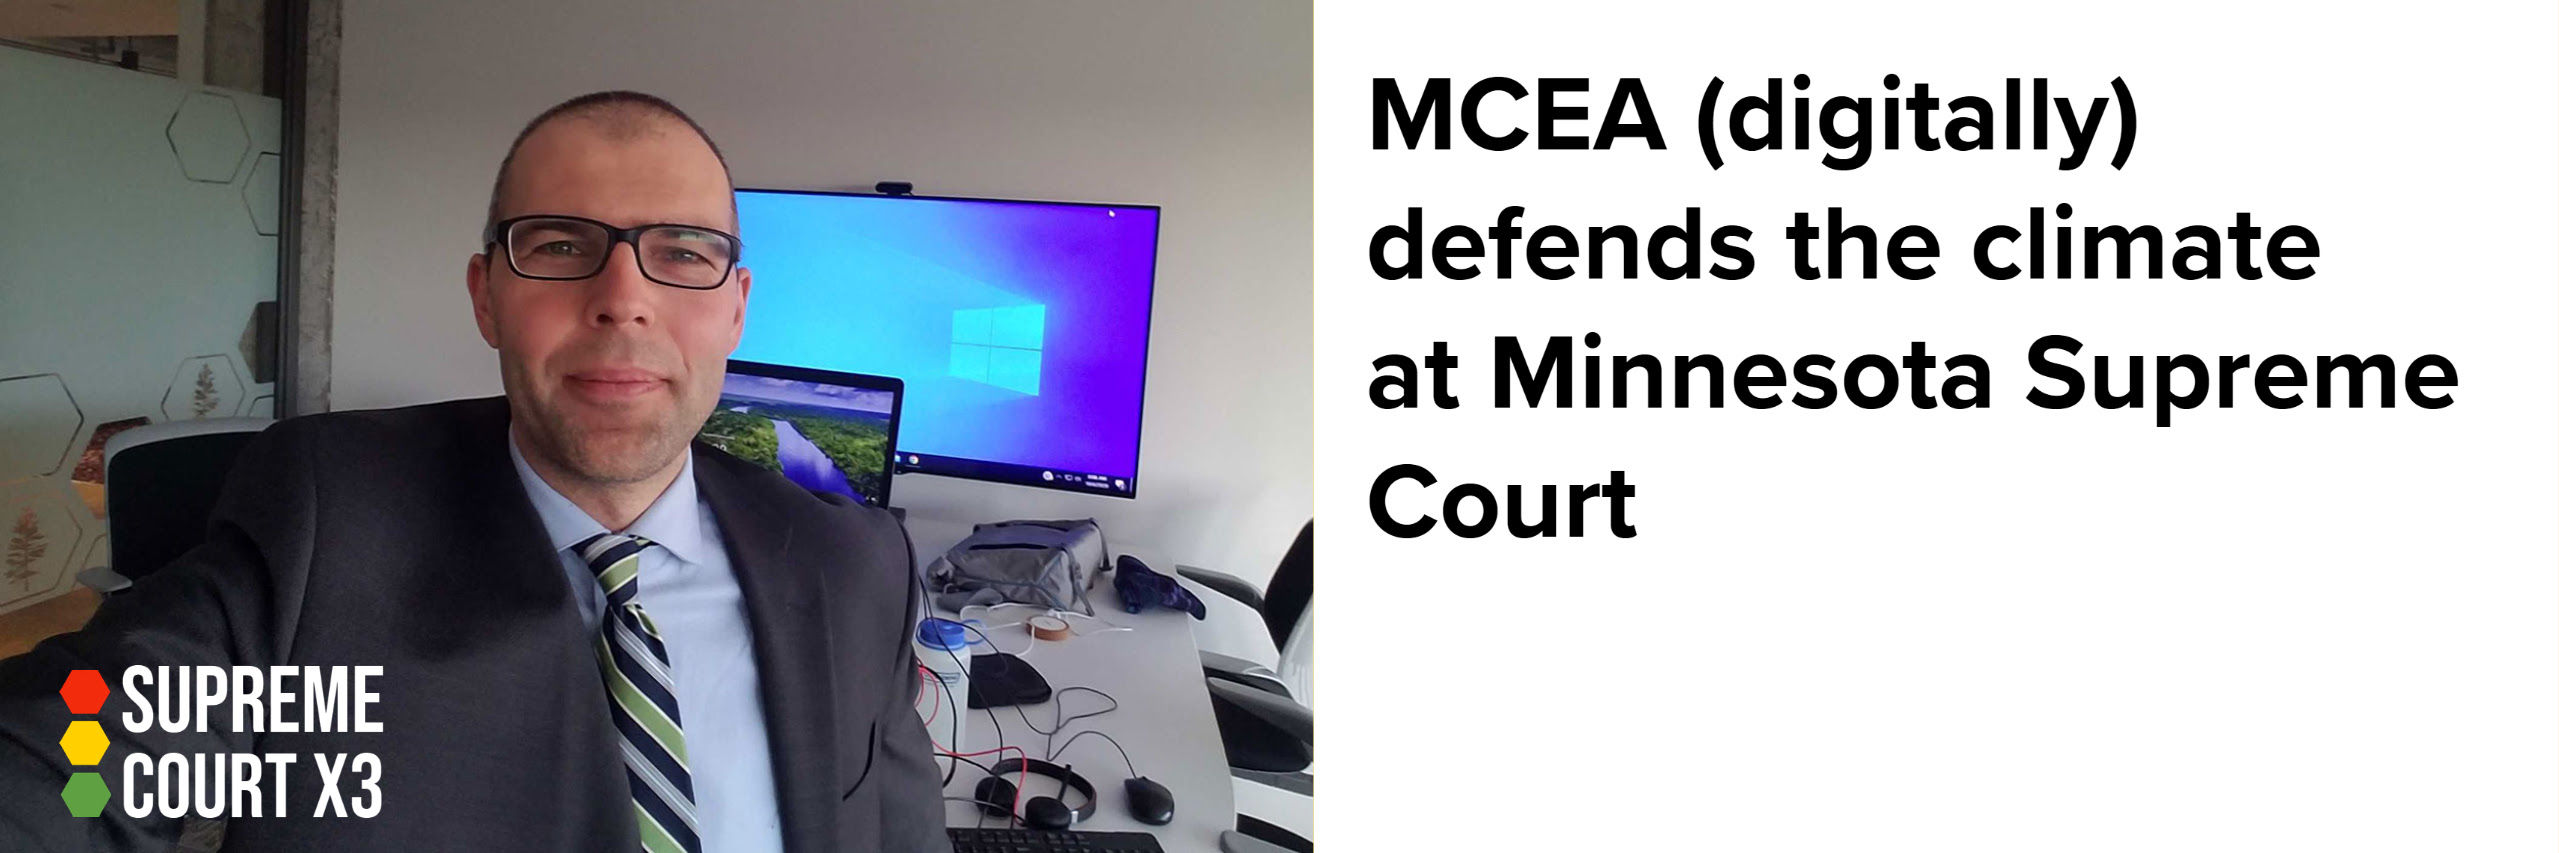 MCEA (digitally) defends the climate at Minnesota Supreme Court